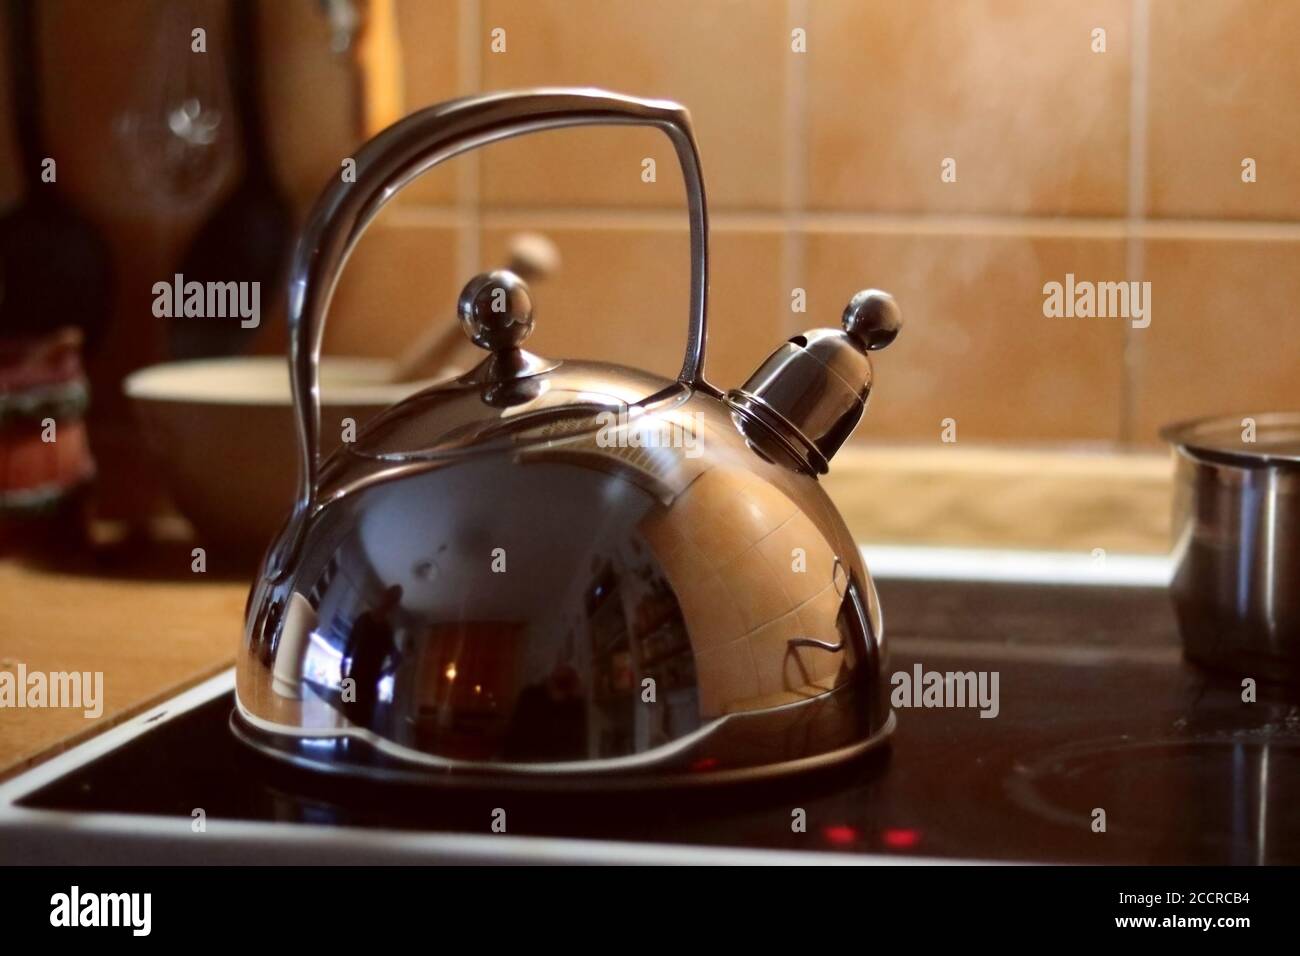 https://c8.alamy.com/comp/2CCRCB4/steel-kettle-on-the-stovepot-in-the-kitchen-boiling-water-2CCRCB4.jpg